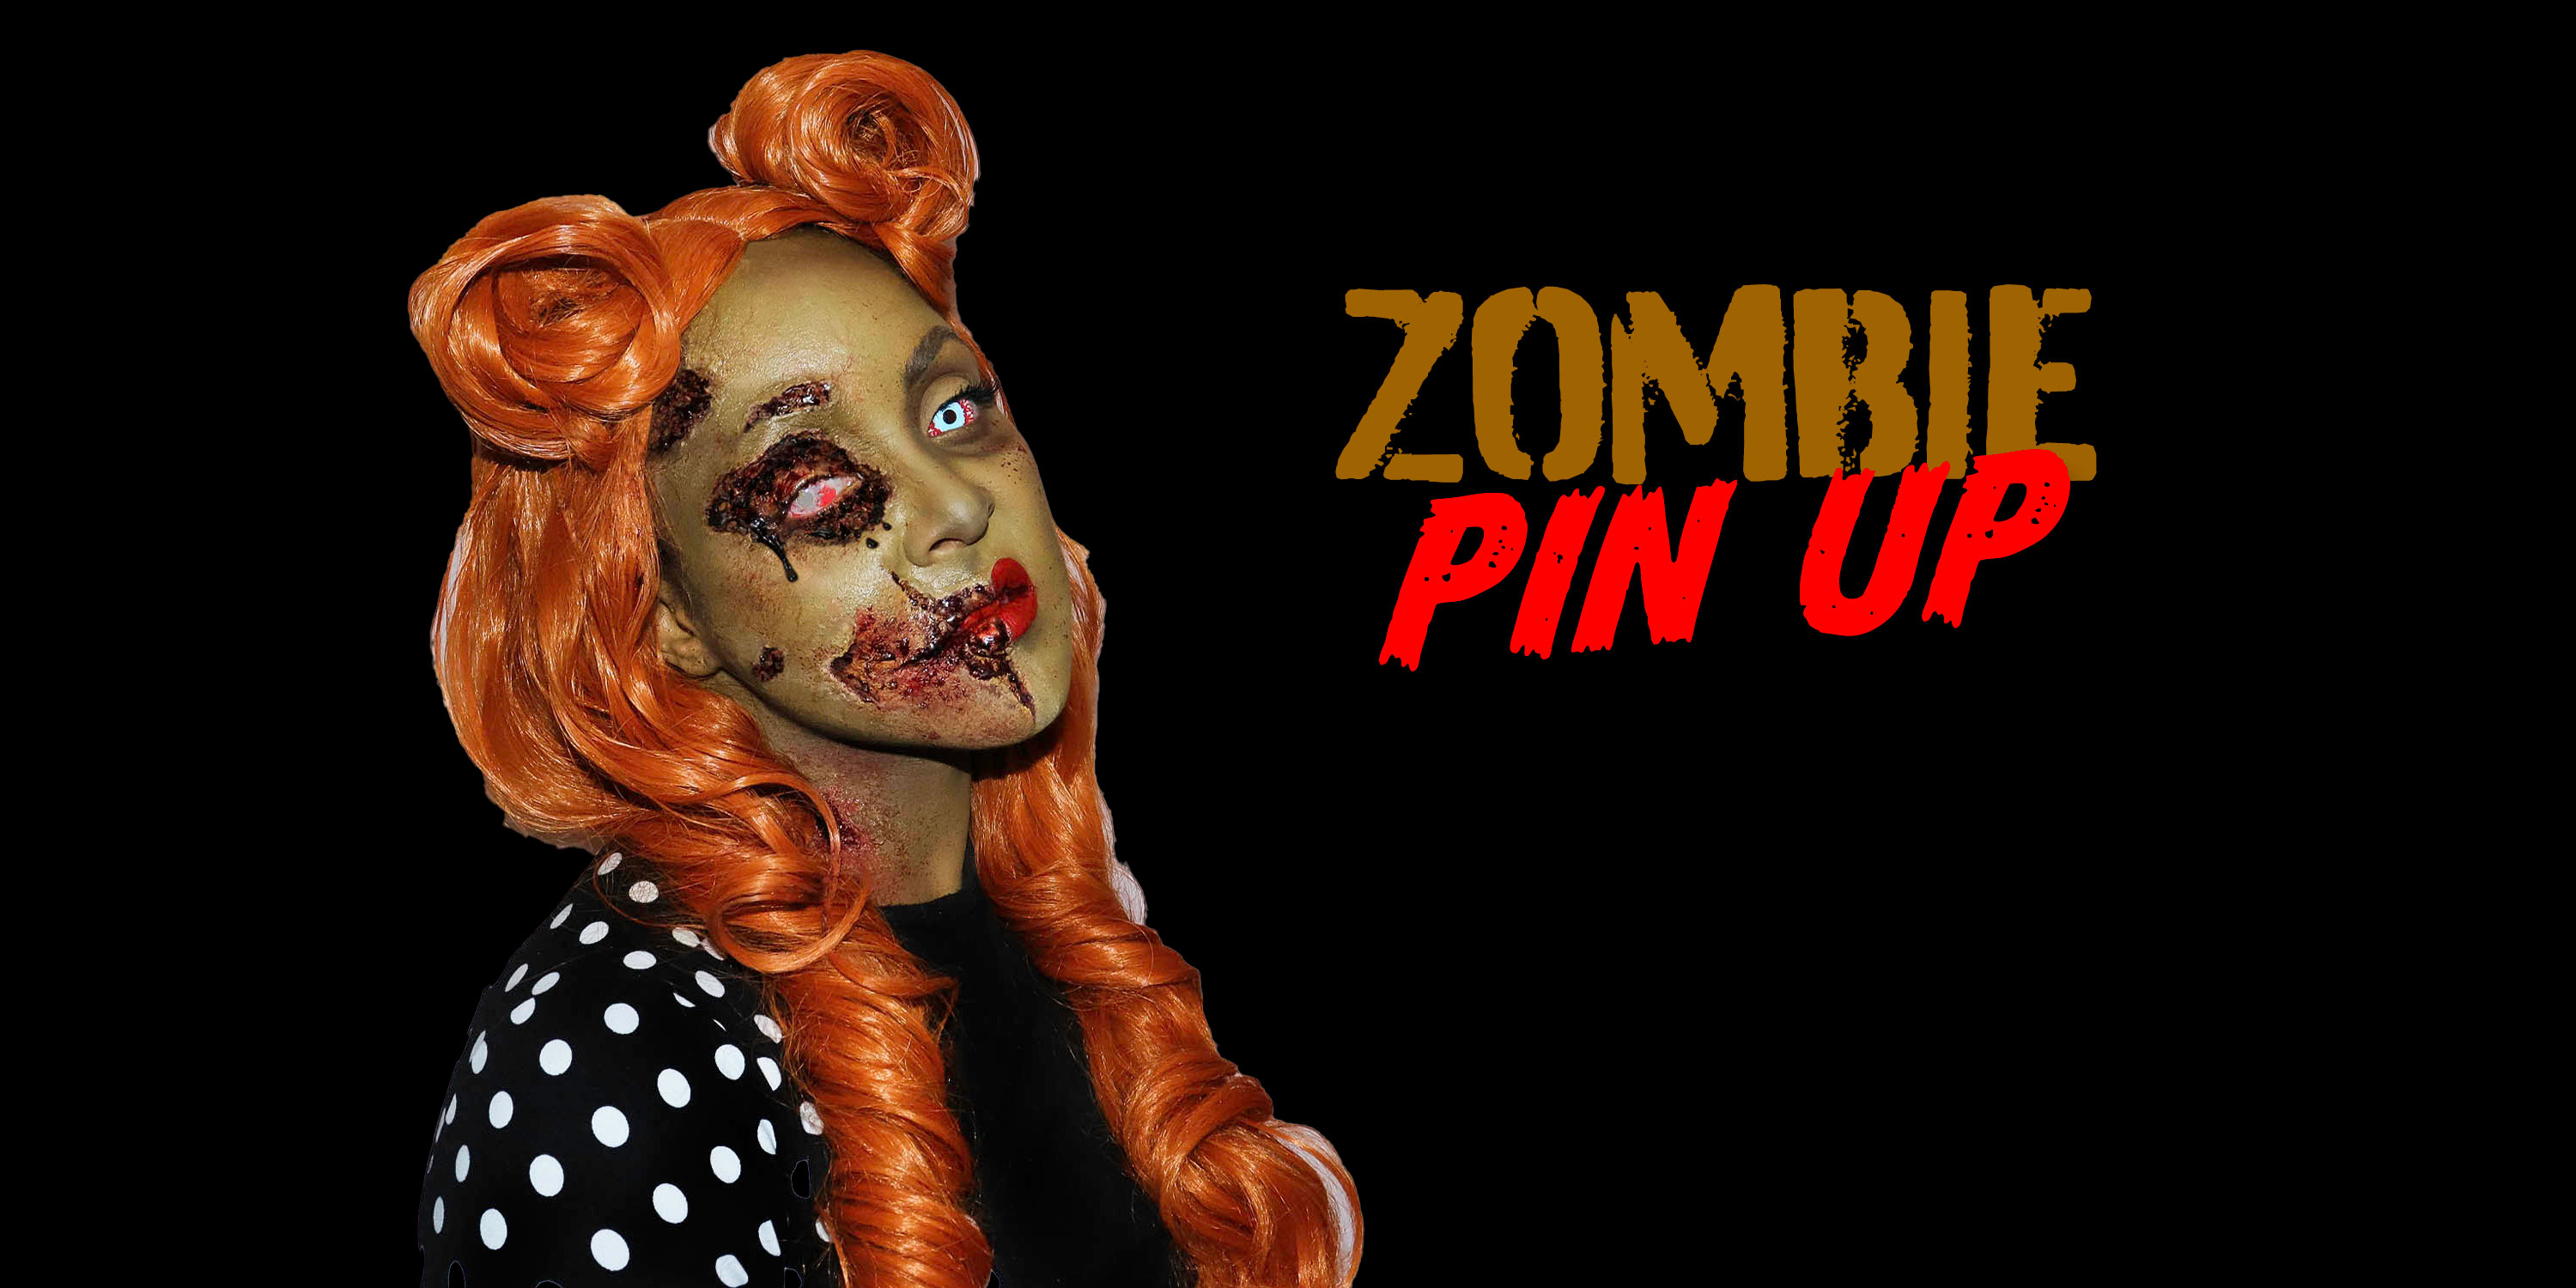 Pin Up Zombie preview title